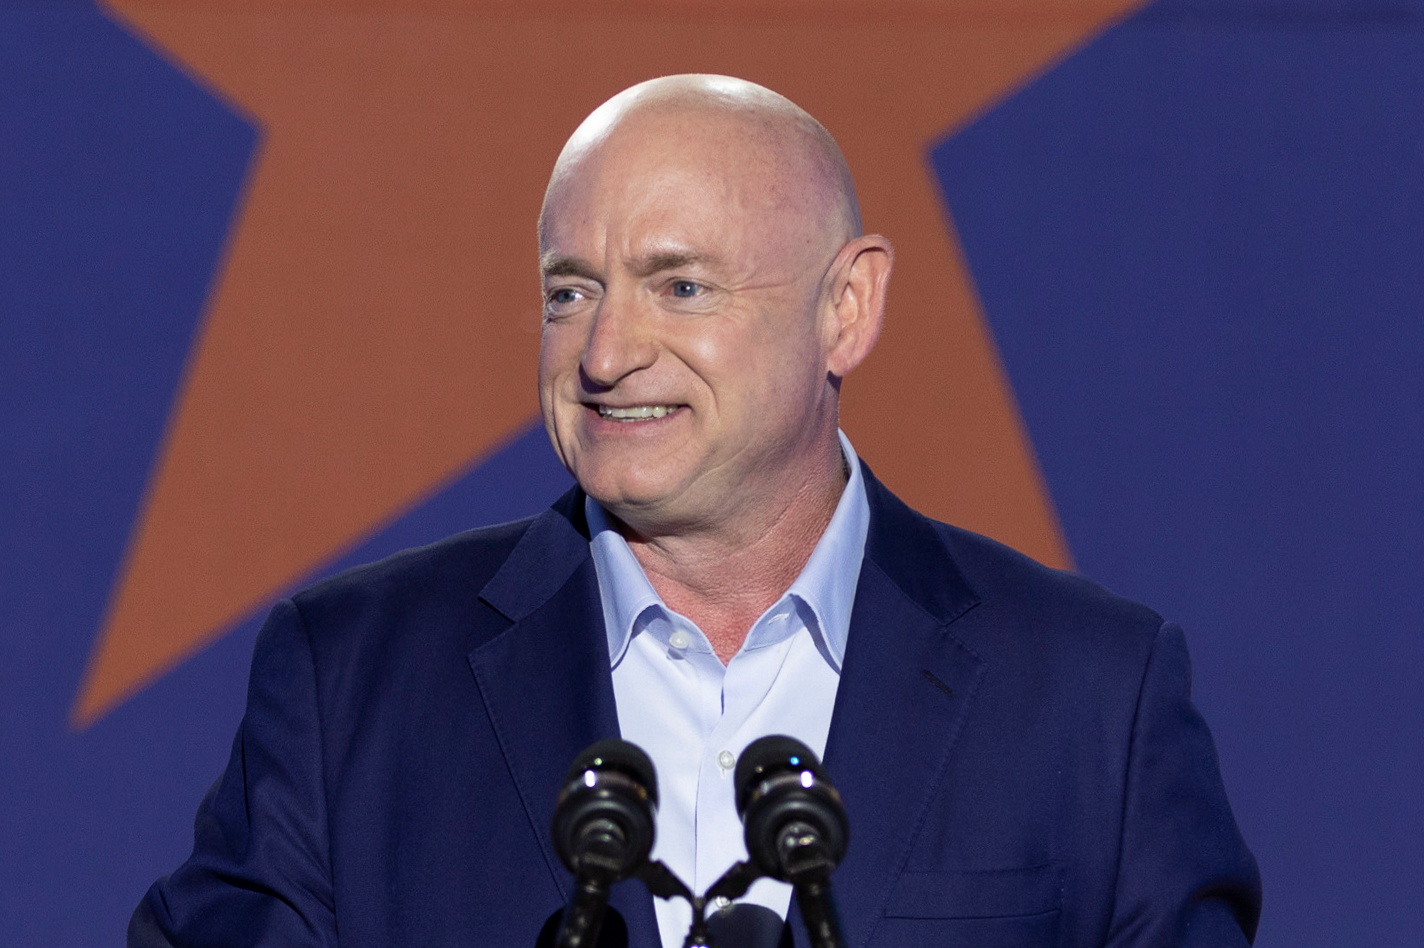 PHOTO: Democratic Senate candidate Mark Kelly speaks at an election campaign party in Tucson, Arizona, Nov. 3, 2020.